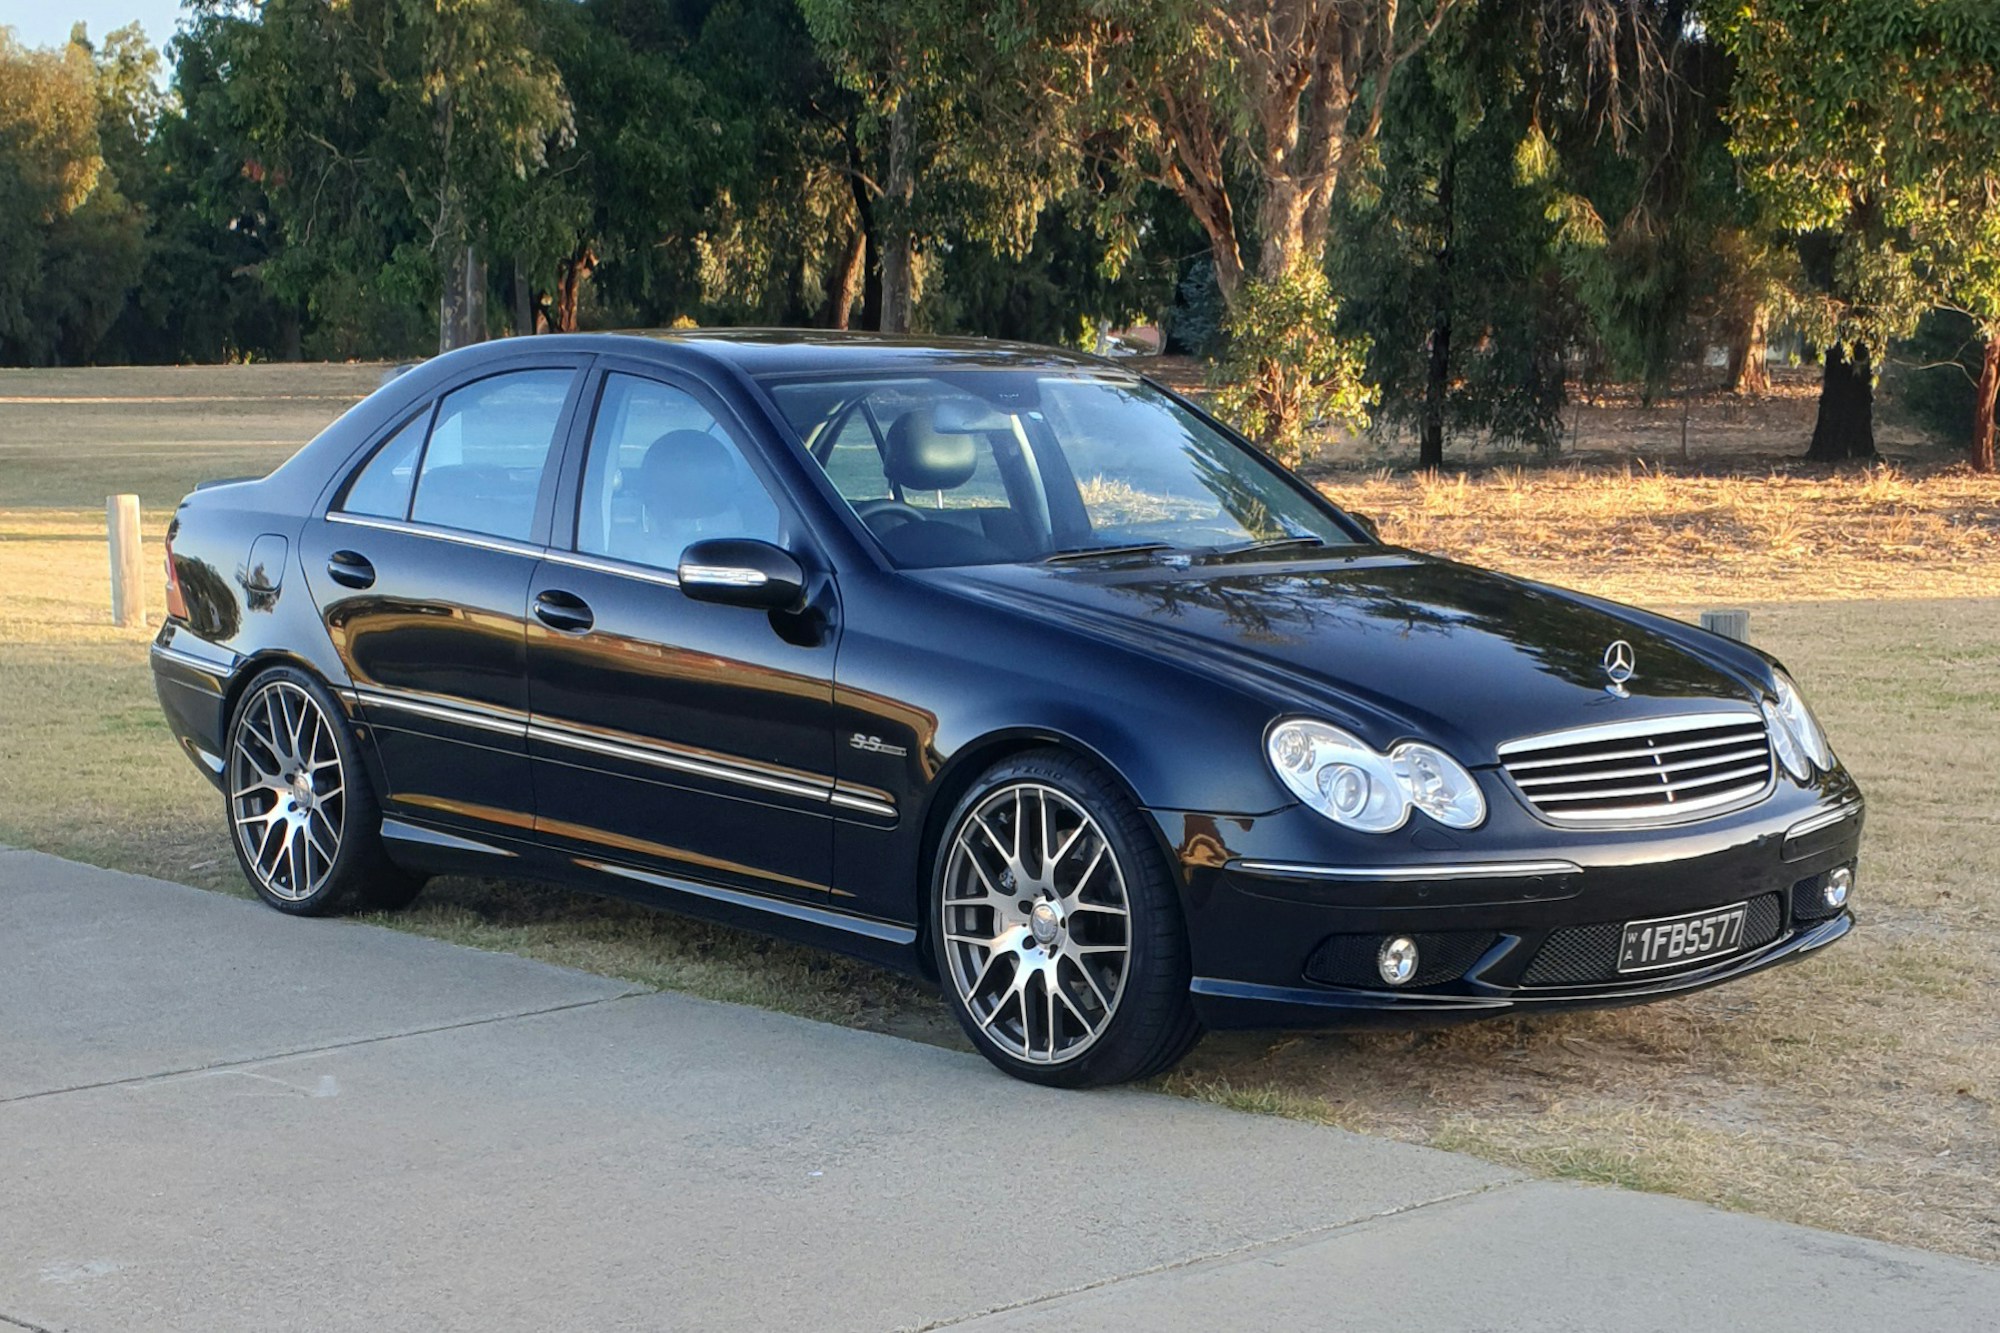 2005 Mercedes-Benz (W203) C55 AMG for sale by classified listing privately  in Perth, WA, Australia